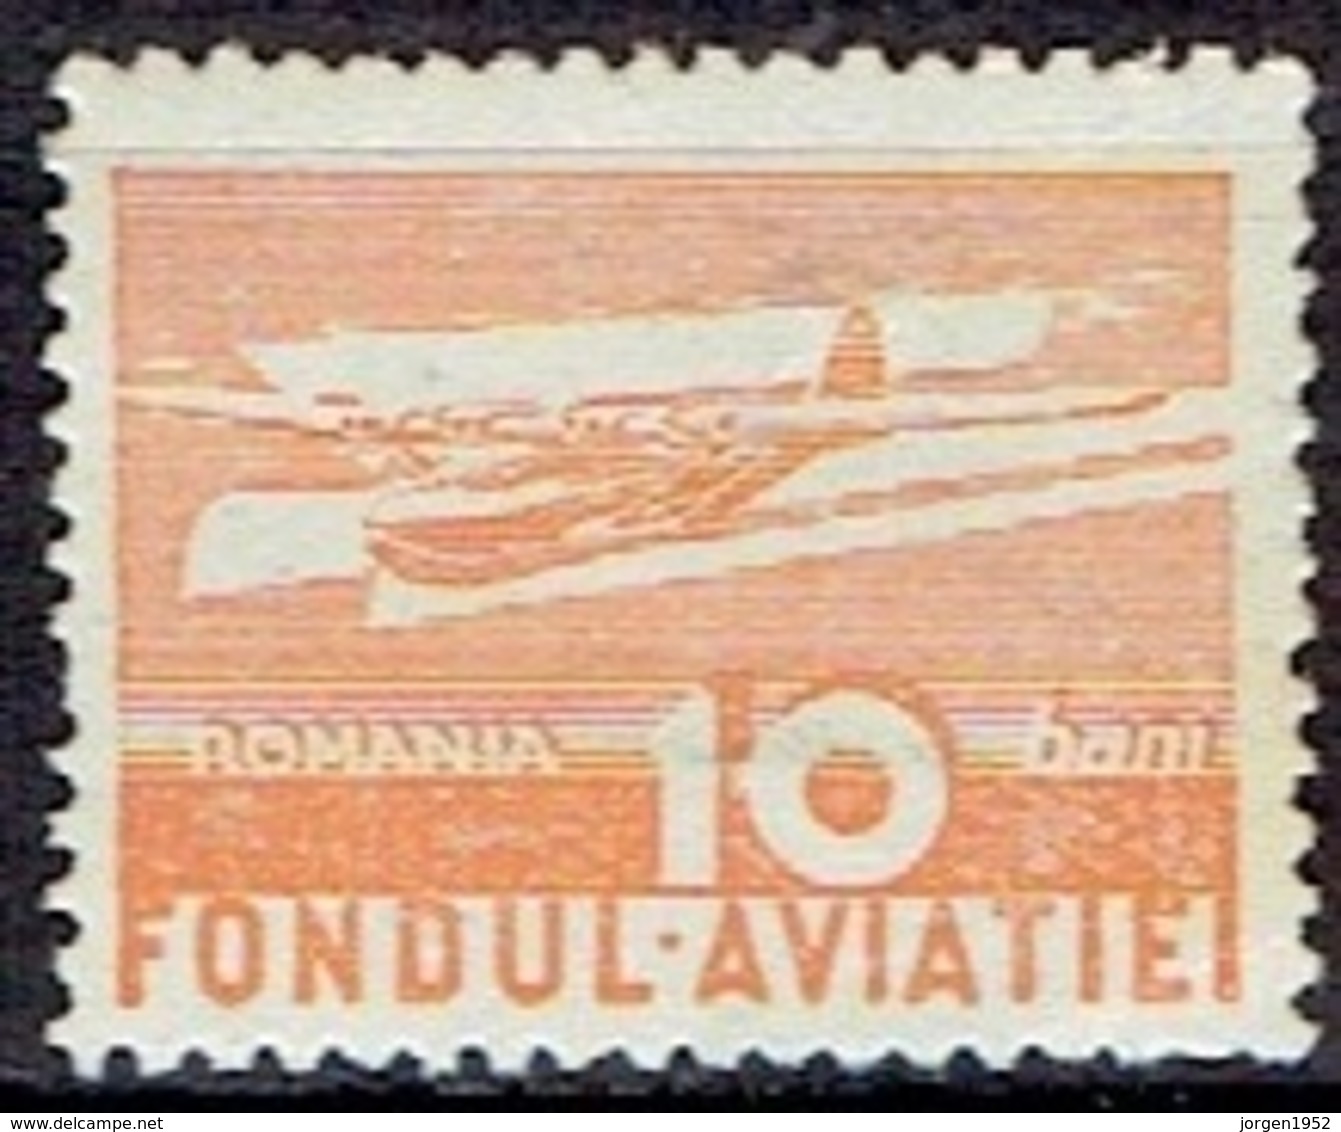 ROMANIA # FROM 1949 * - Service